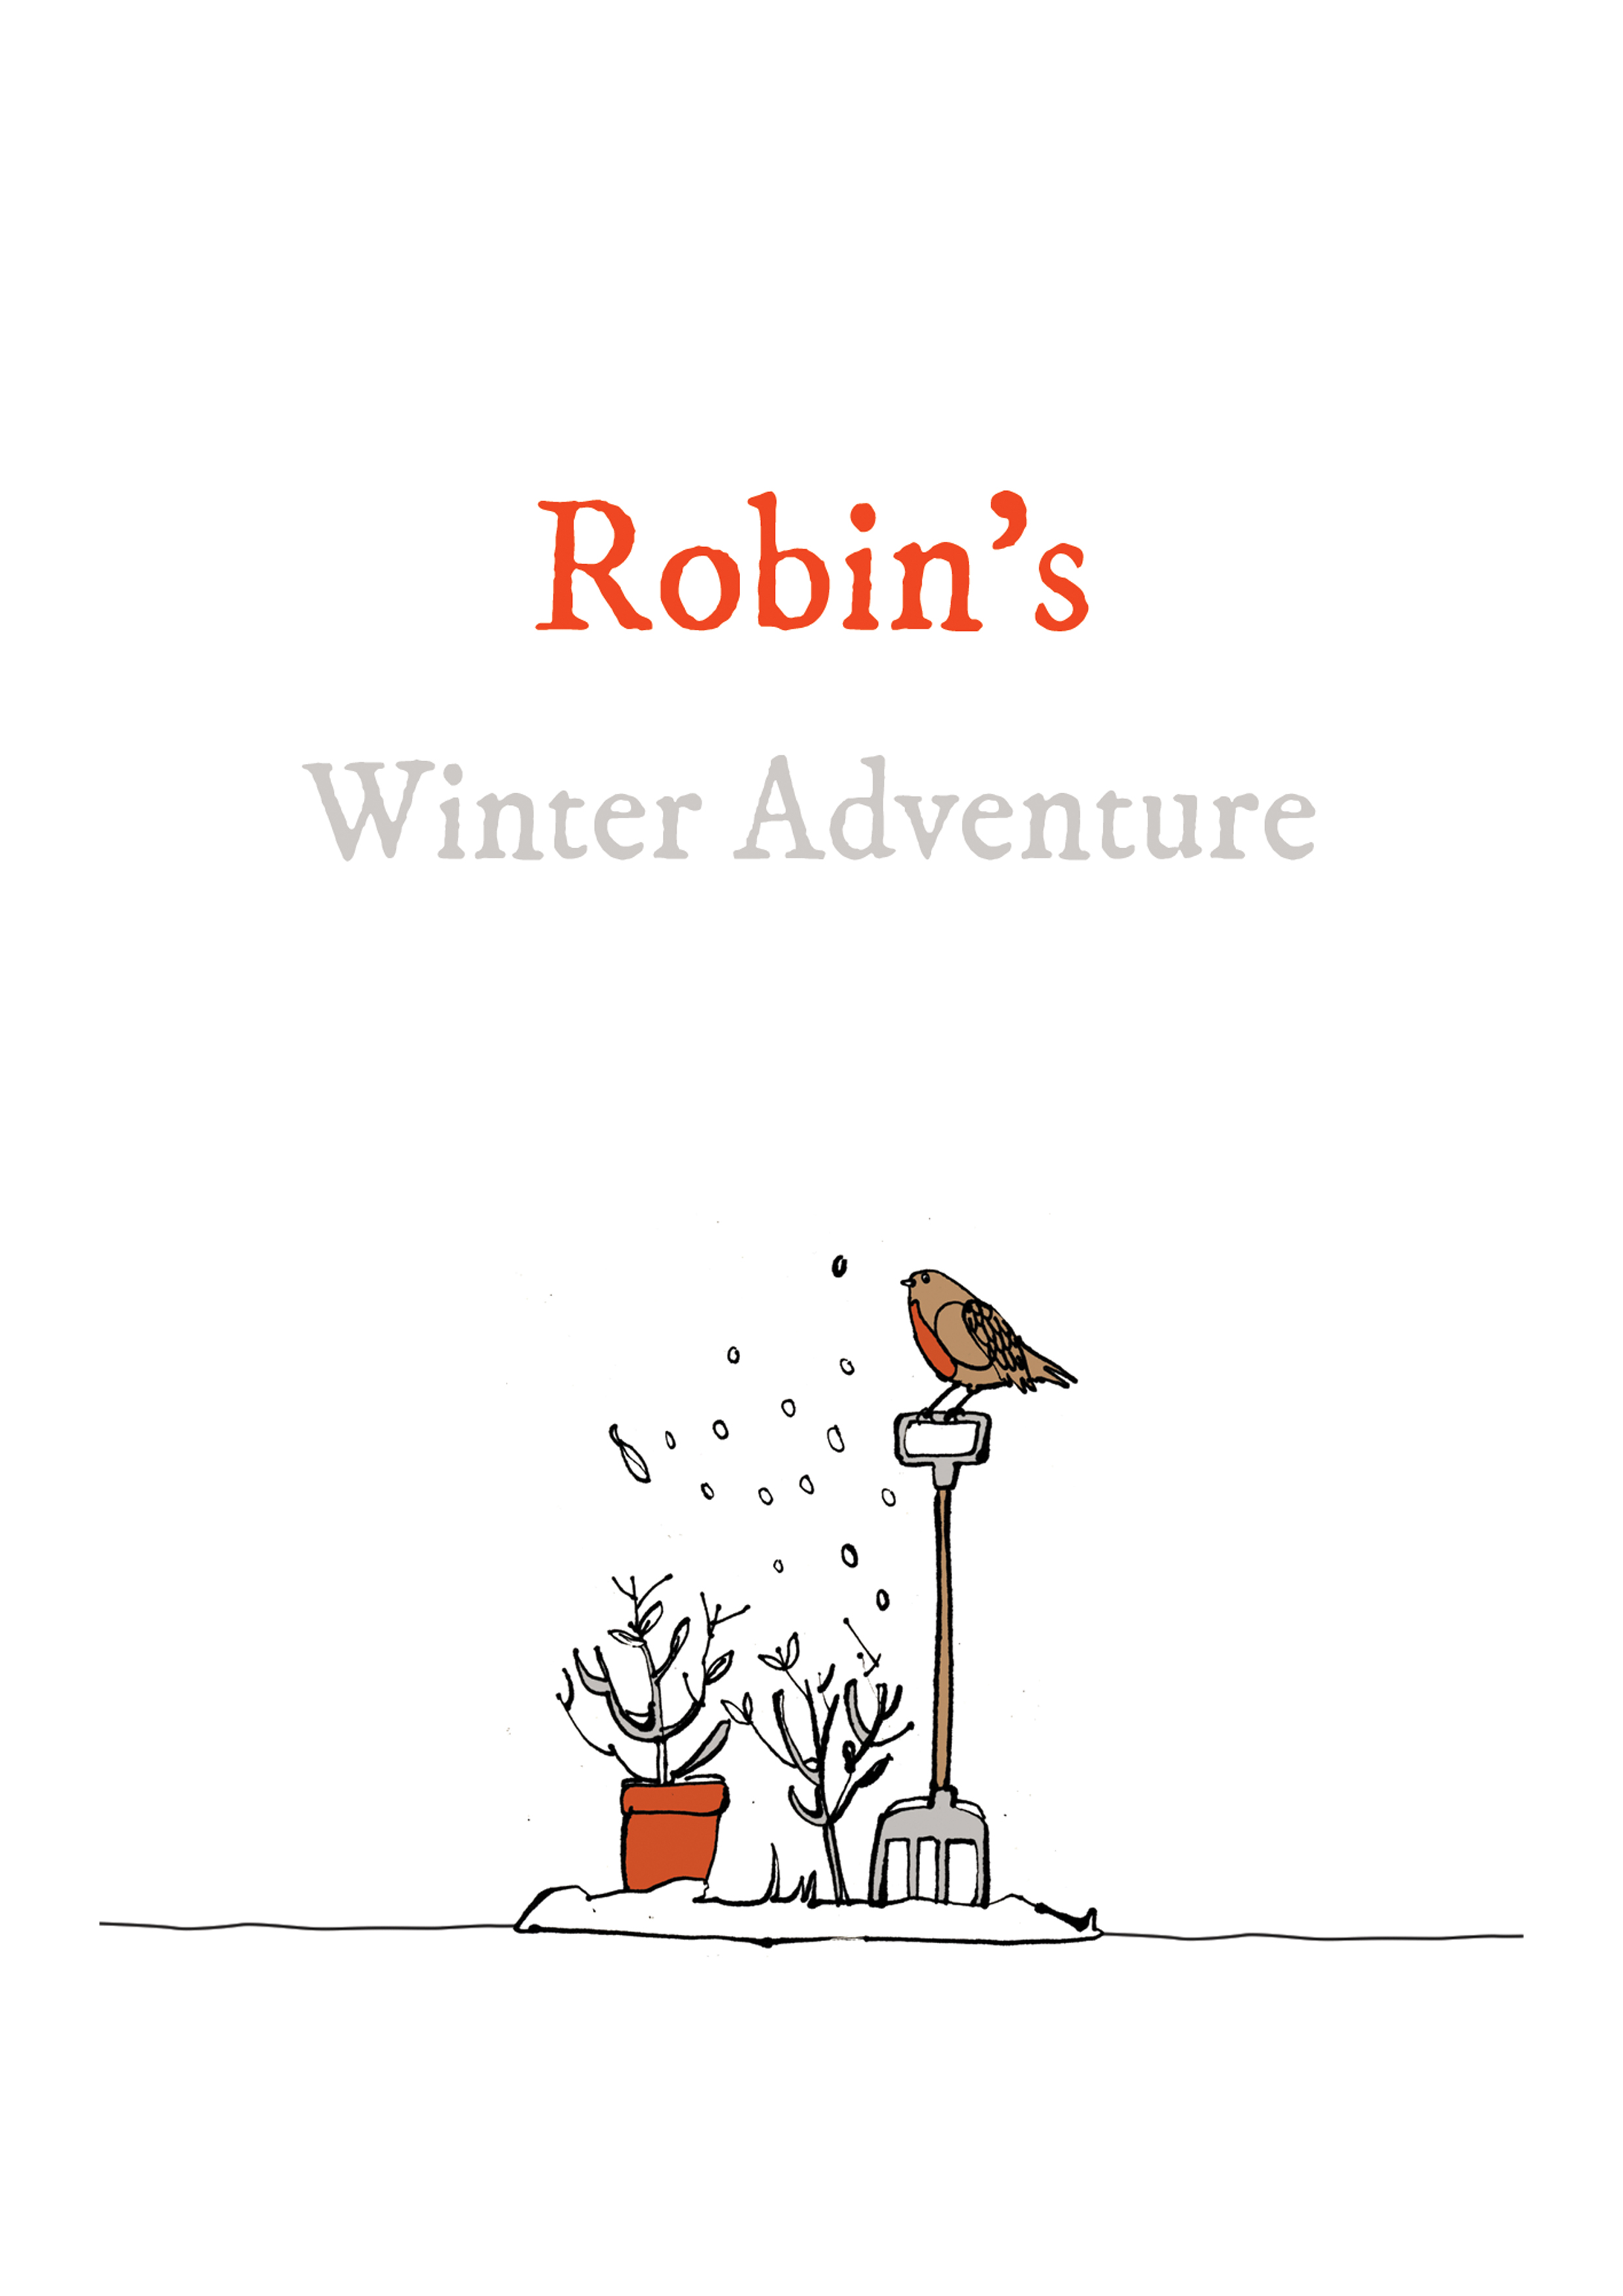 Illustrated Story of Robin's Winter Adventure